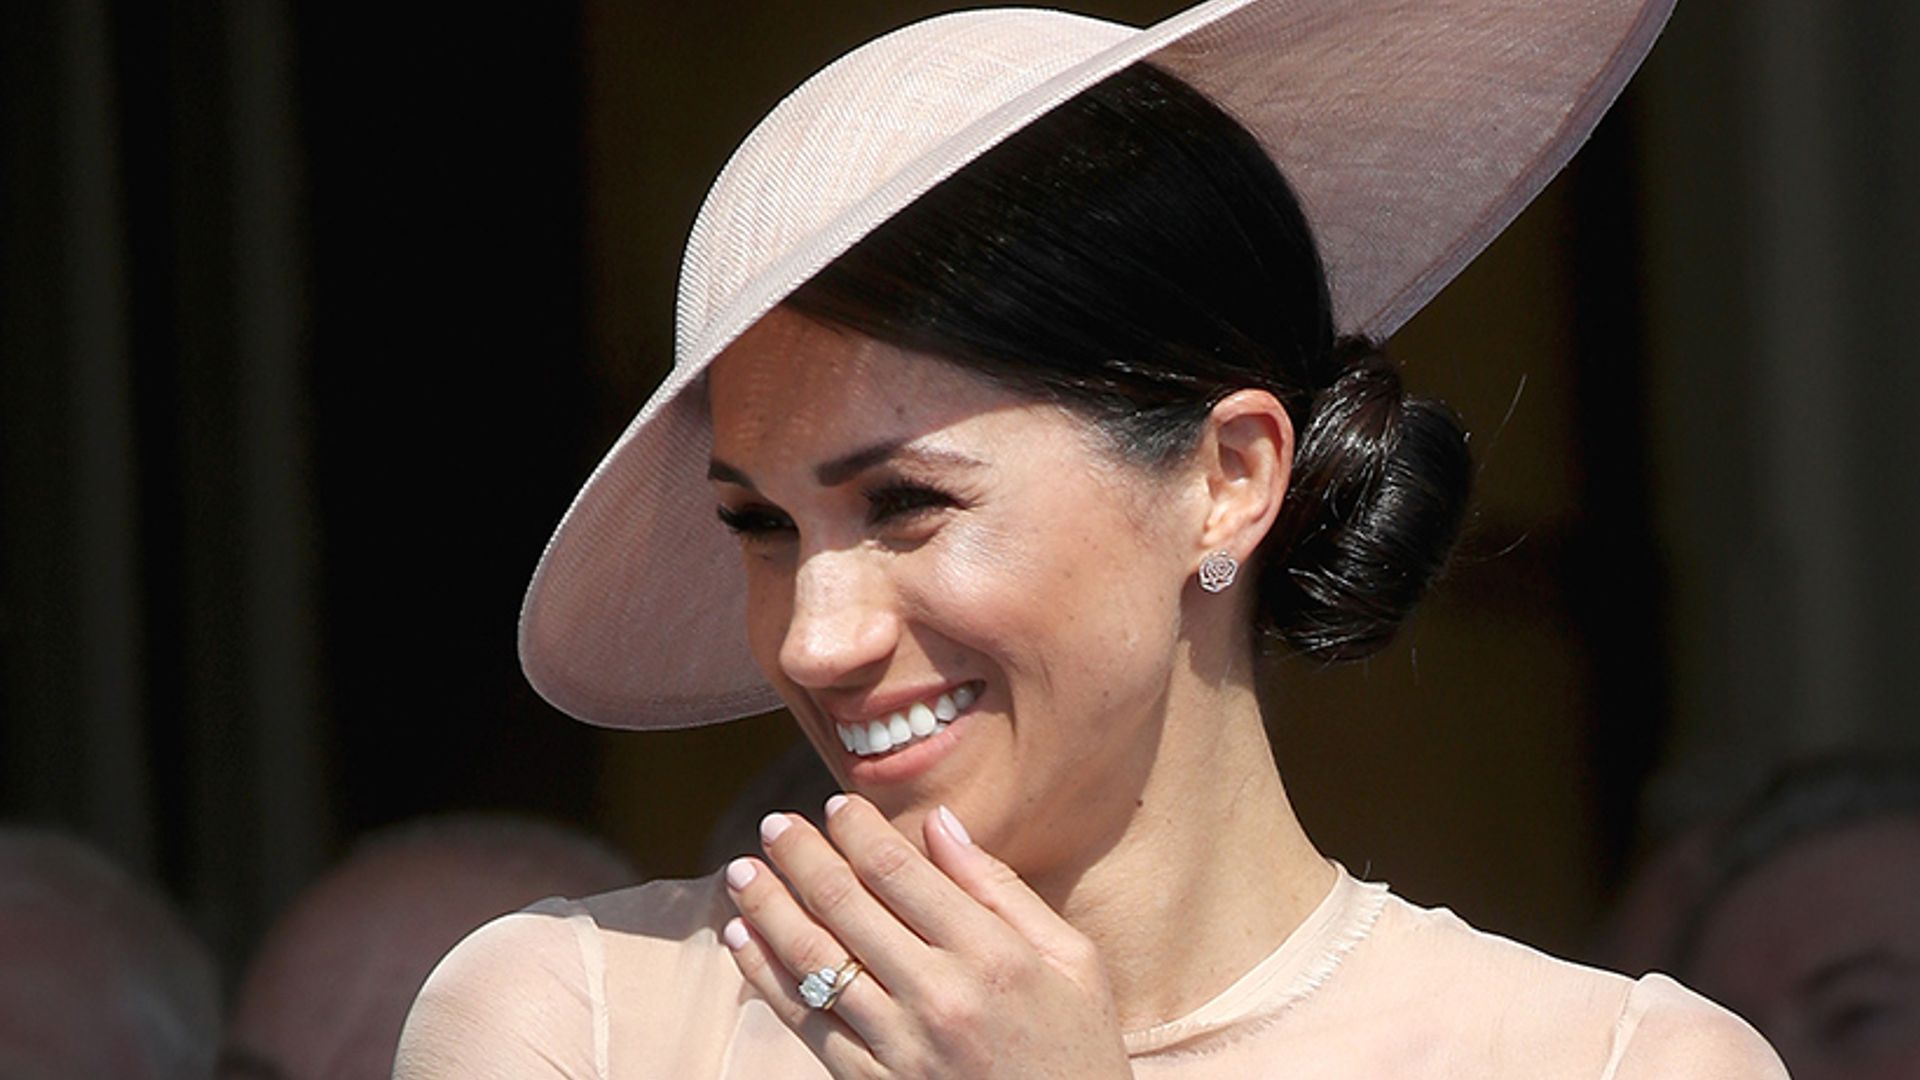 meghan markle laughing